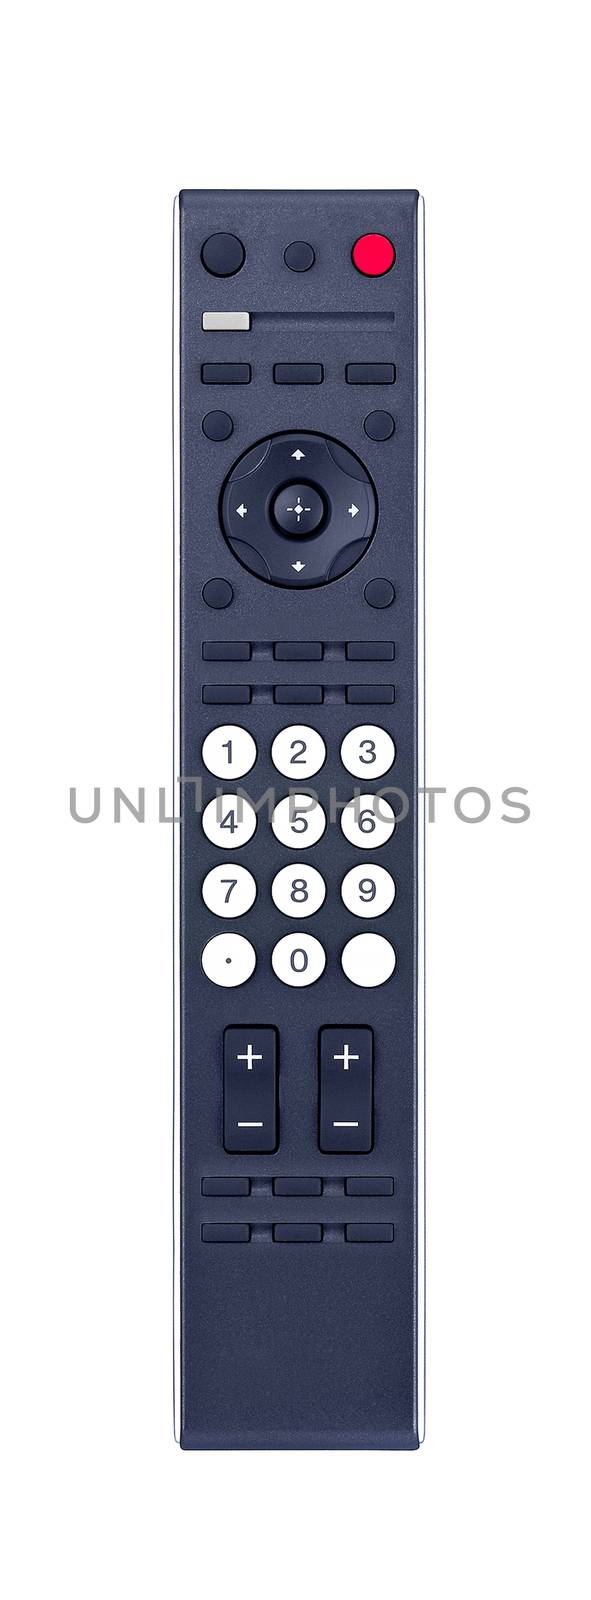 TV remote control isolated on white background